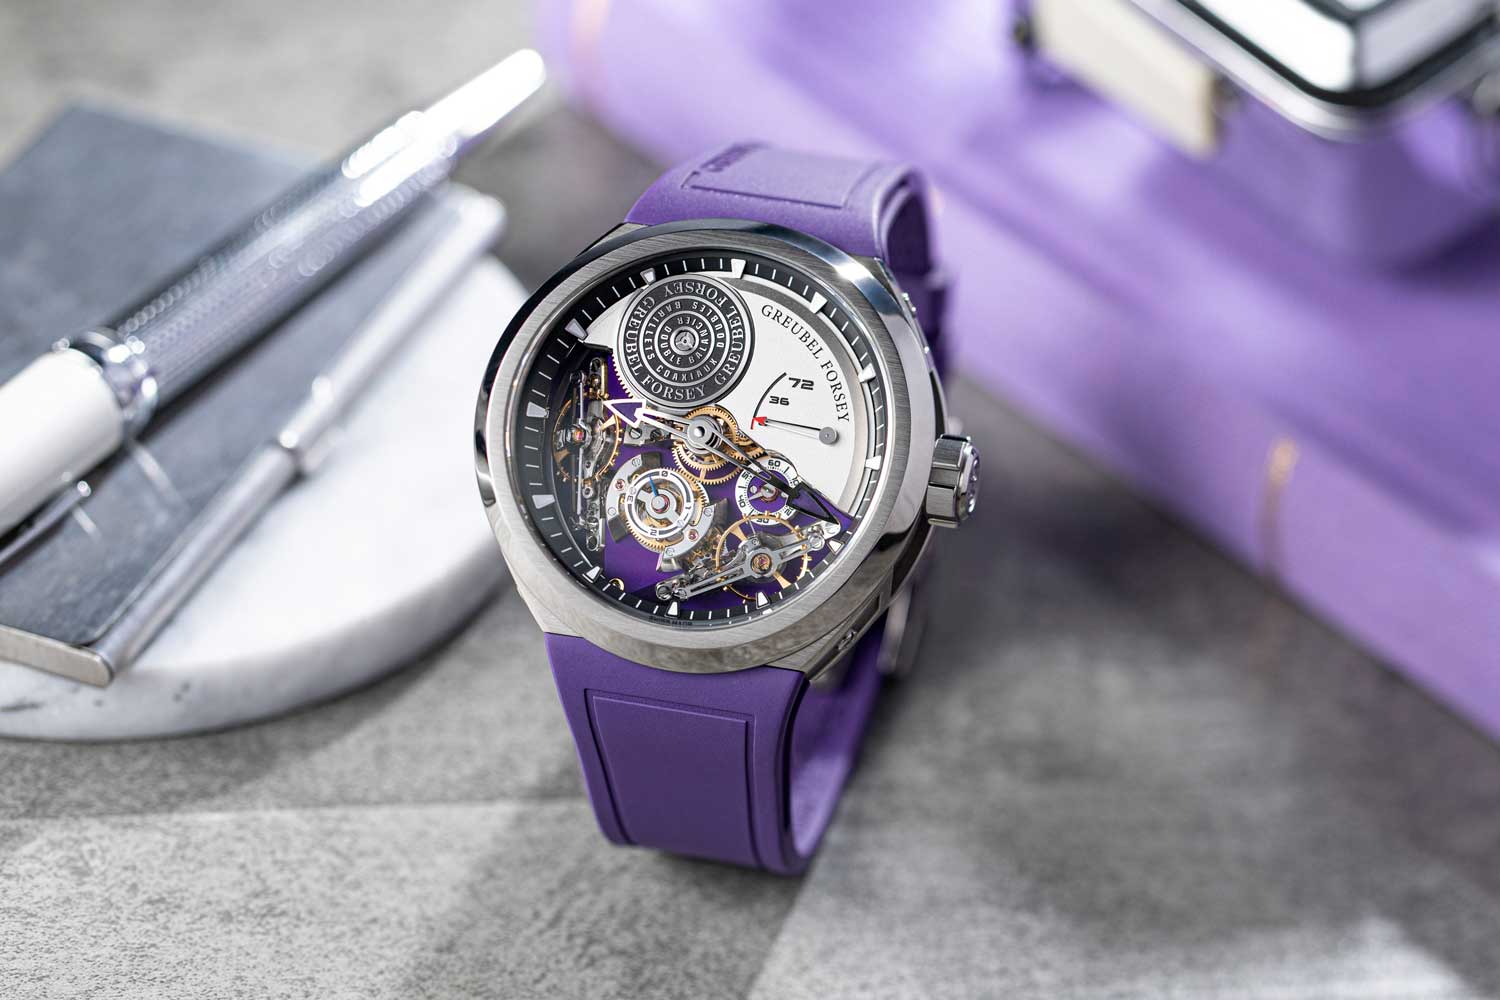 The burst of purple makes for an arresting iteration of an already deeply impressive watch (Image: Revolution©)